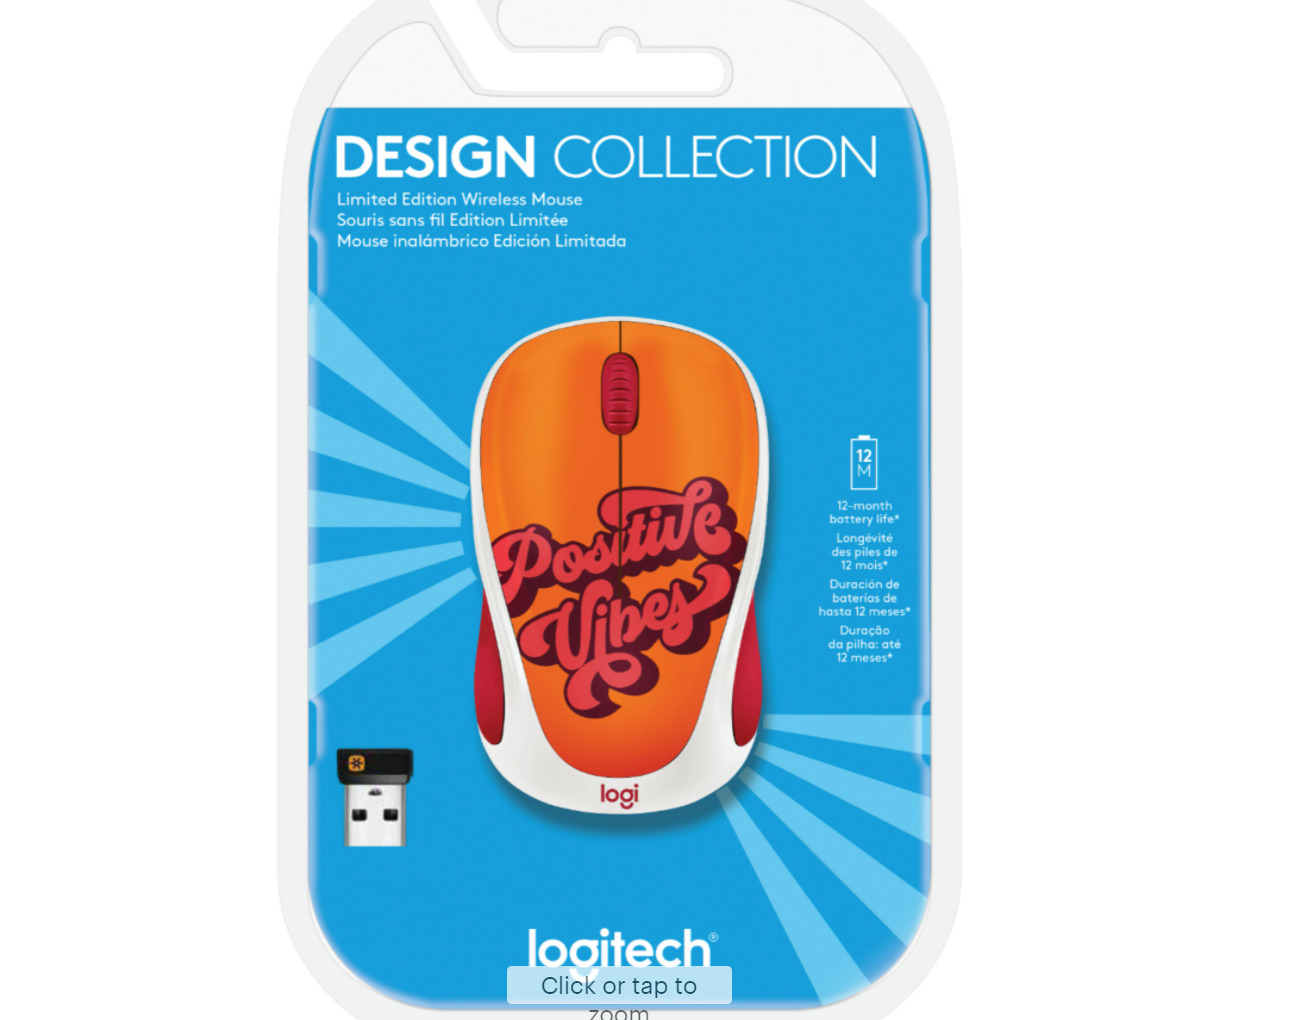 Logitech Design Collection Limited Edition Wireless Compact Mouse Positive Vibes